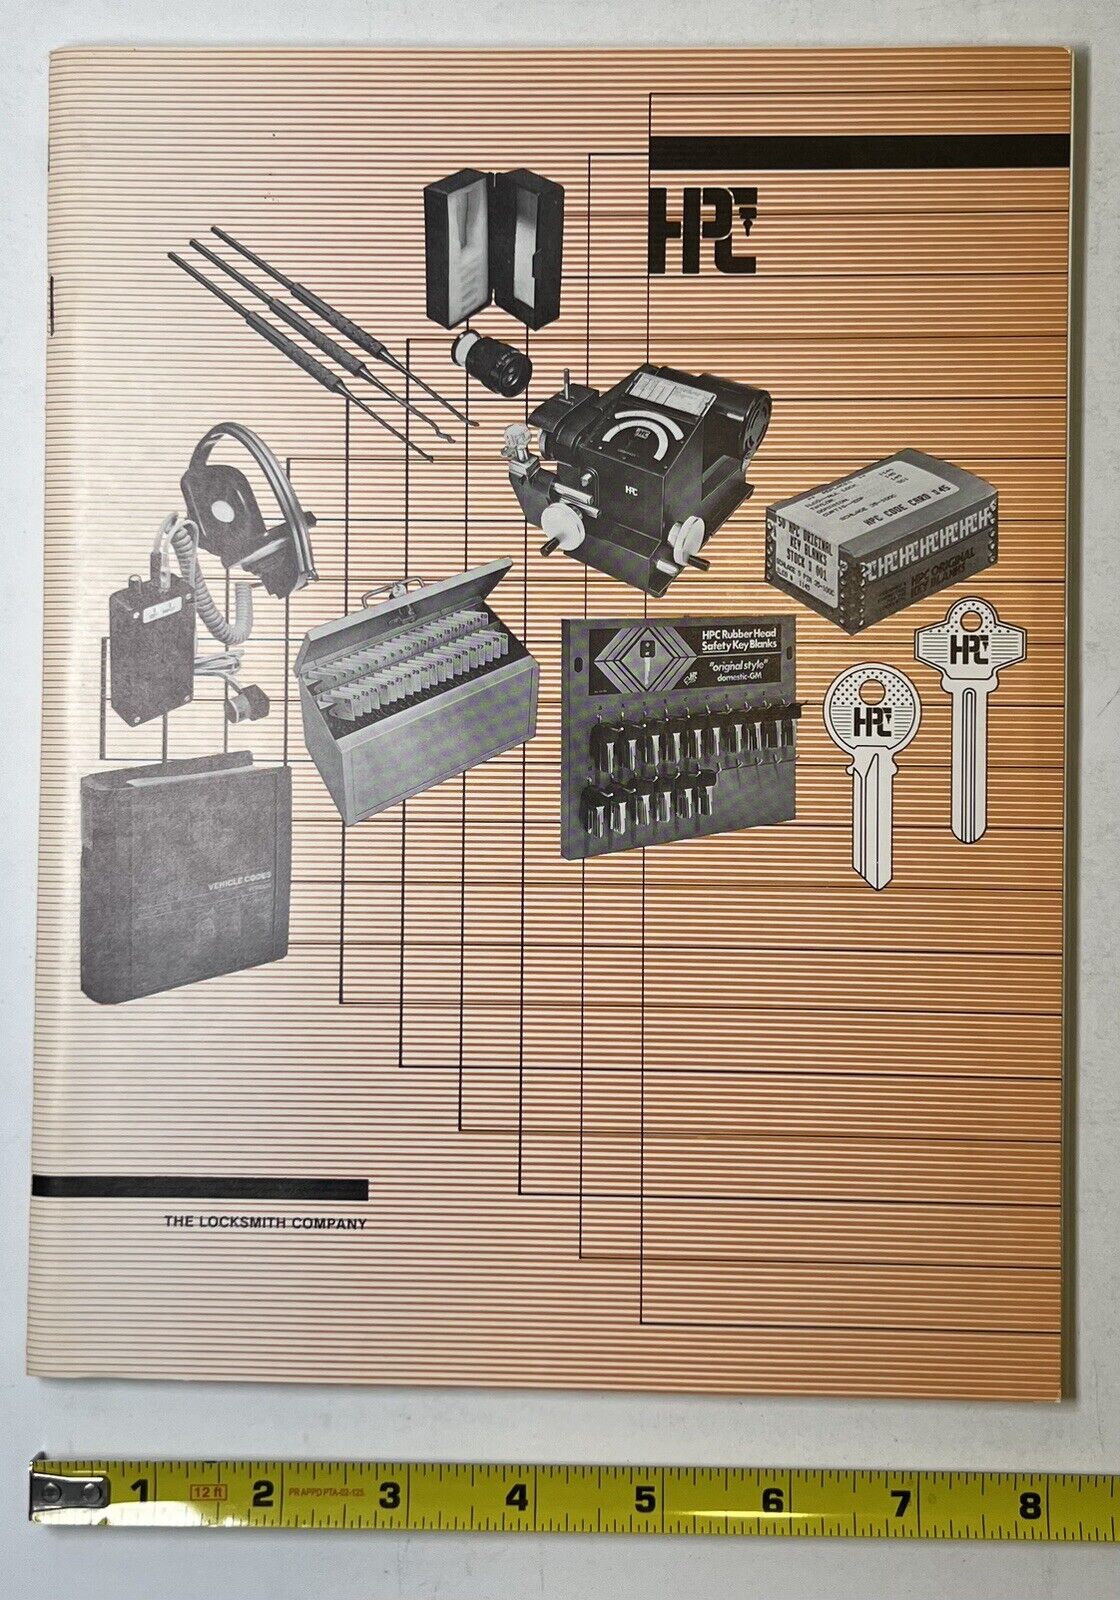 HPC INC Product Catalog #707 from Chicago, IL -  Dated 1984